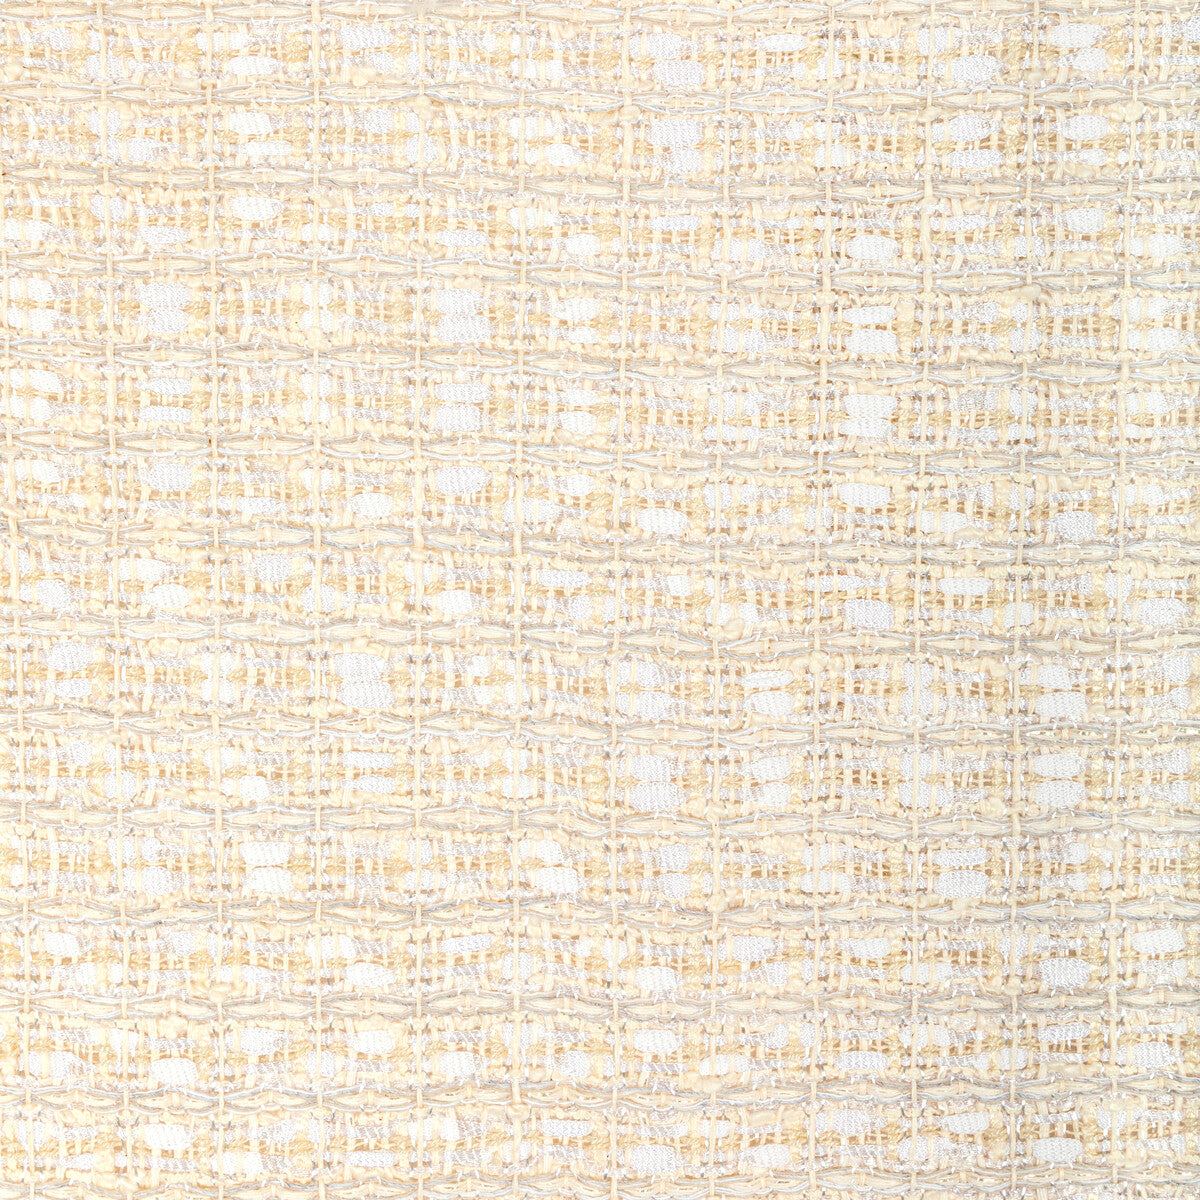 Sheer Luxe fabric in cream color - pattern 4886.1.0 - by Kravet Couture in the Modern Luxe III collection